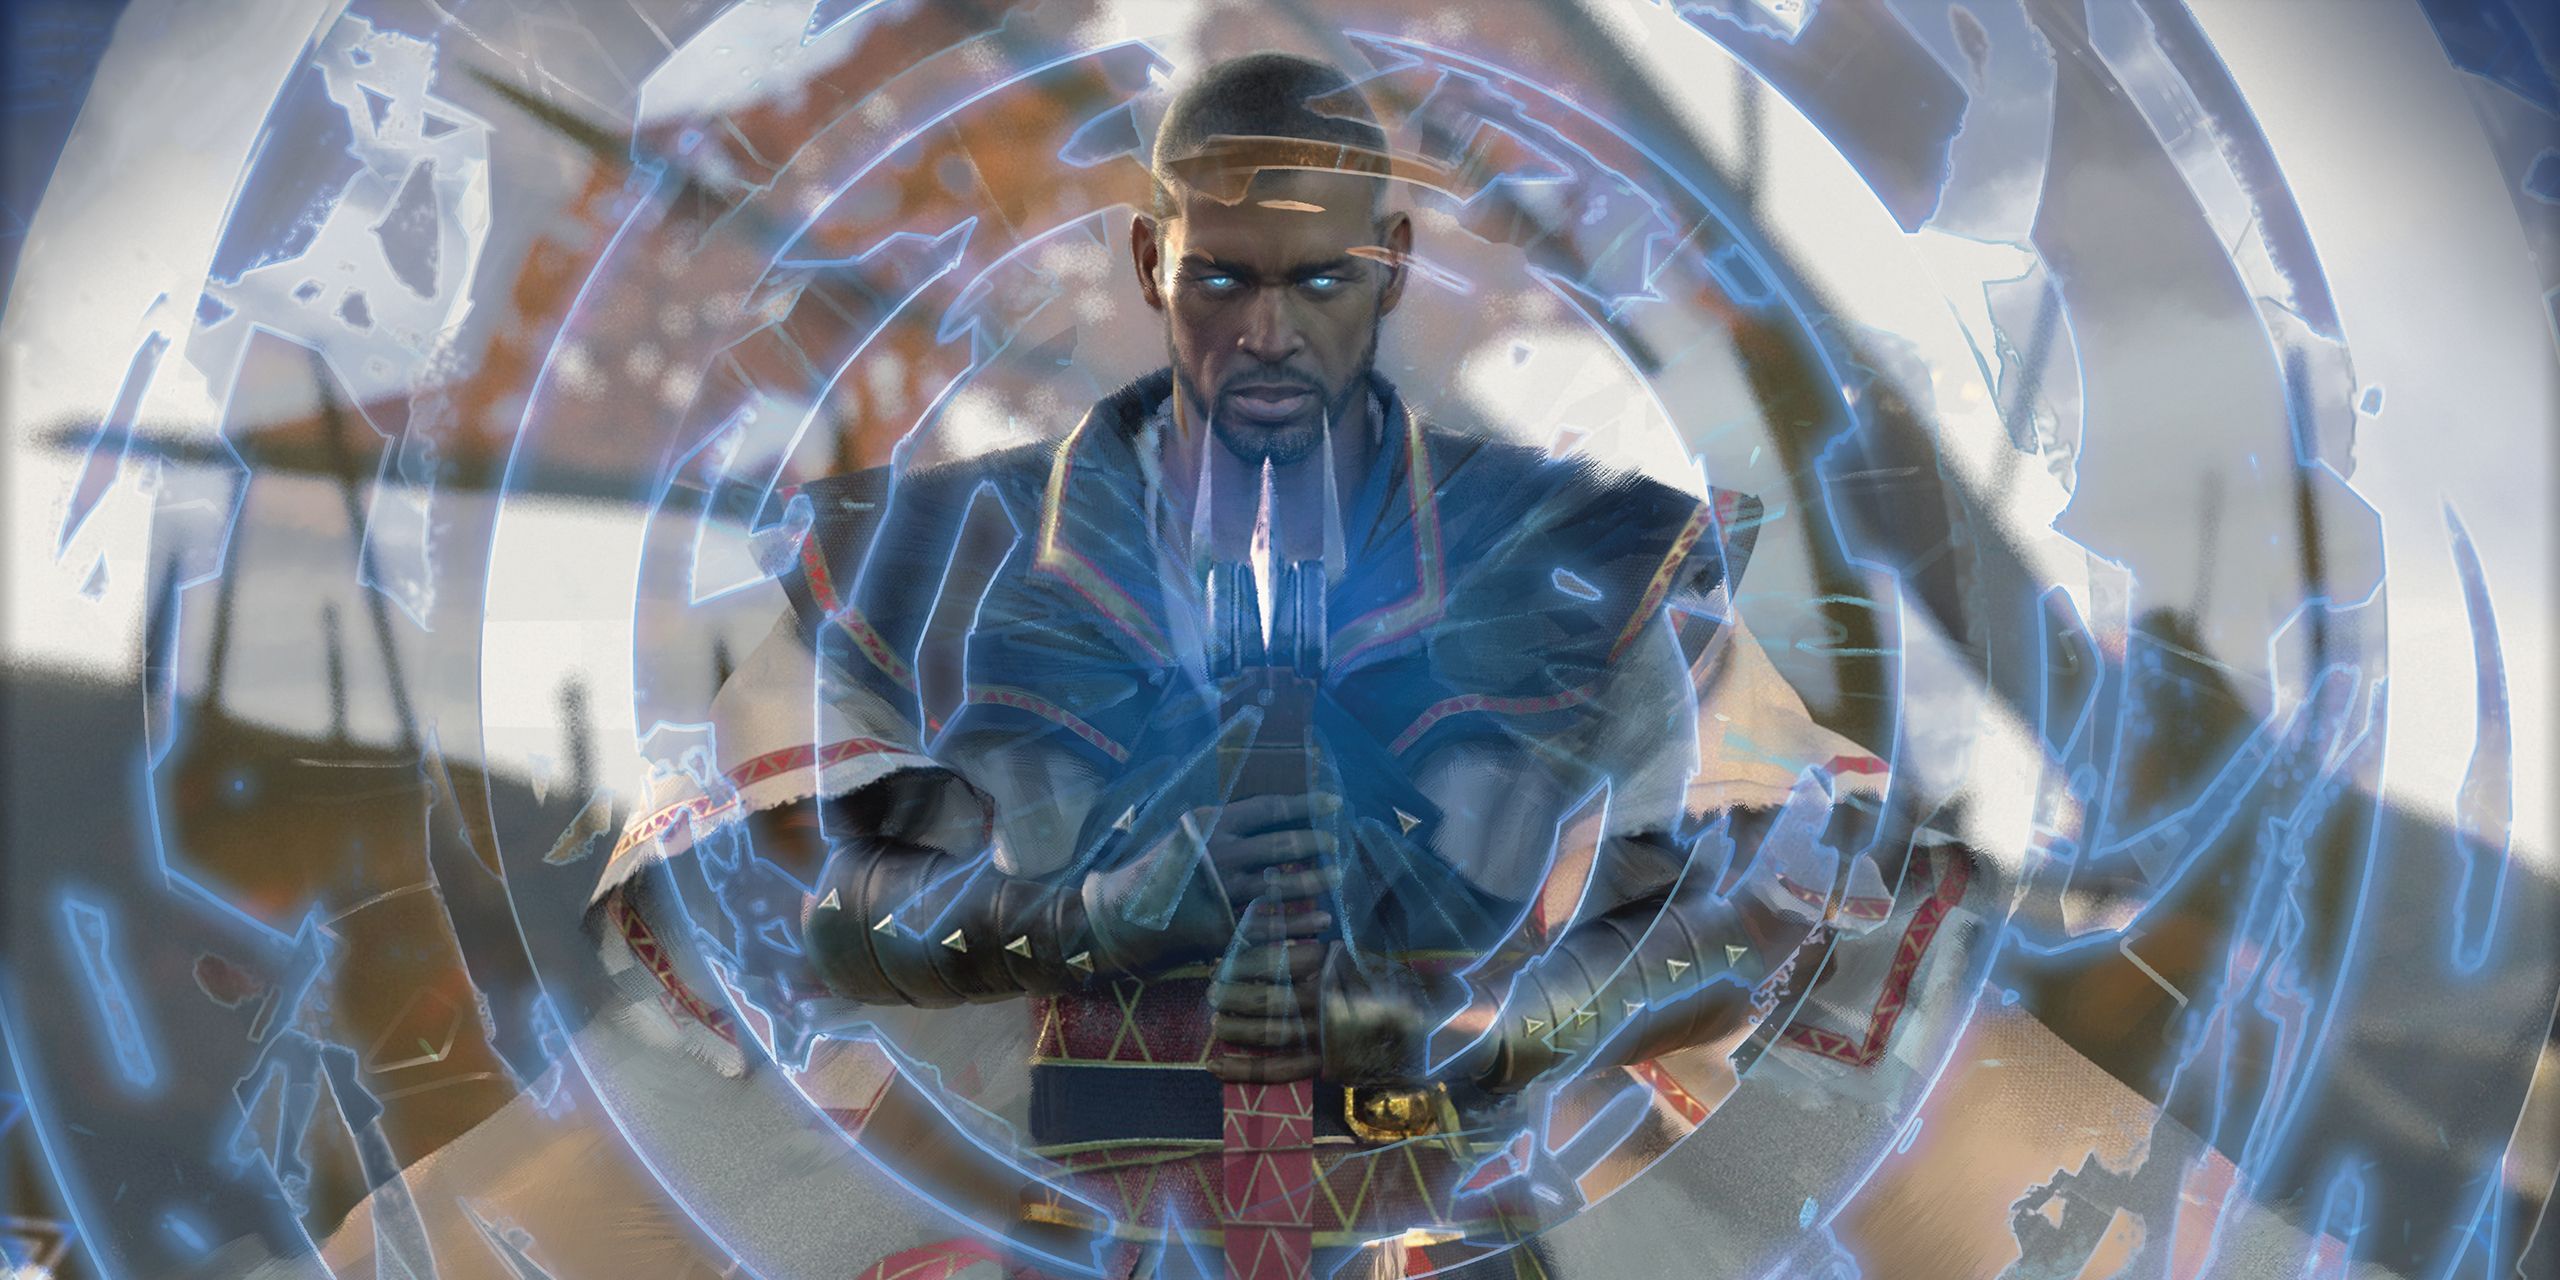 Teferi as featured in Core Set 2021.